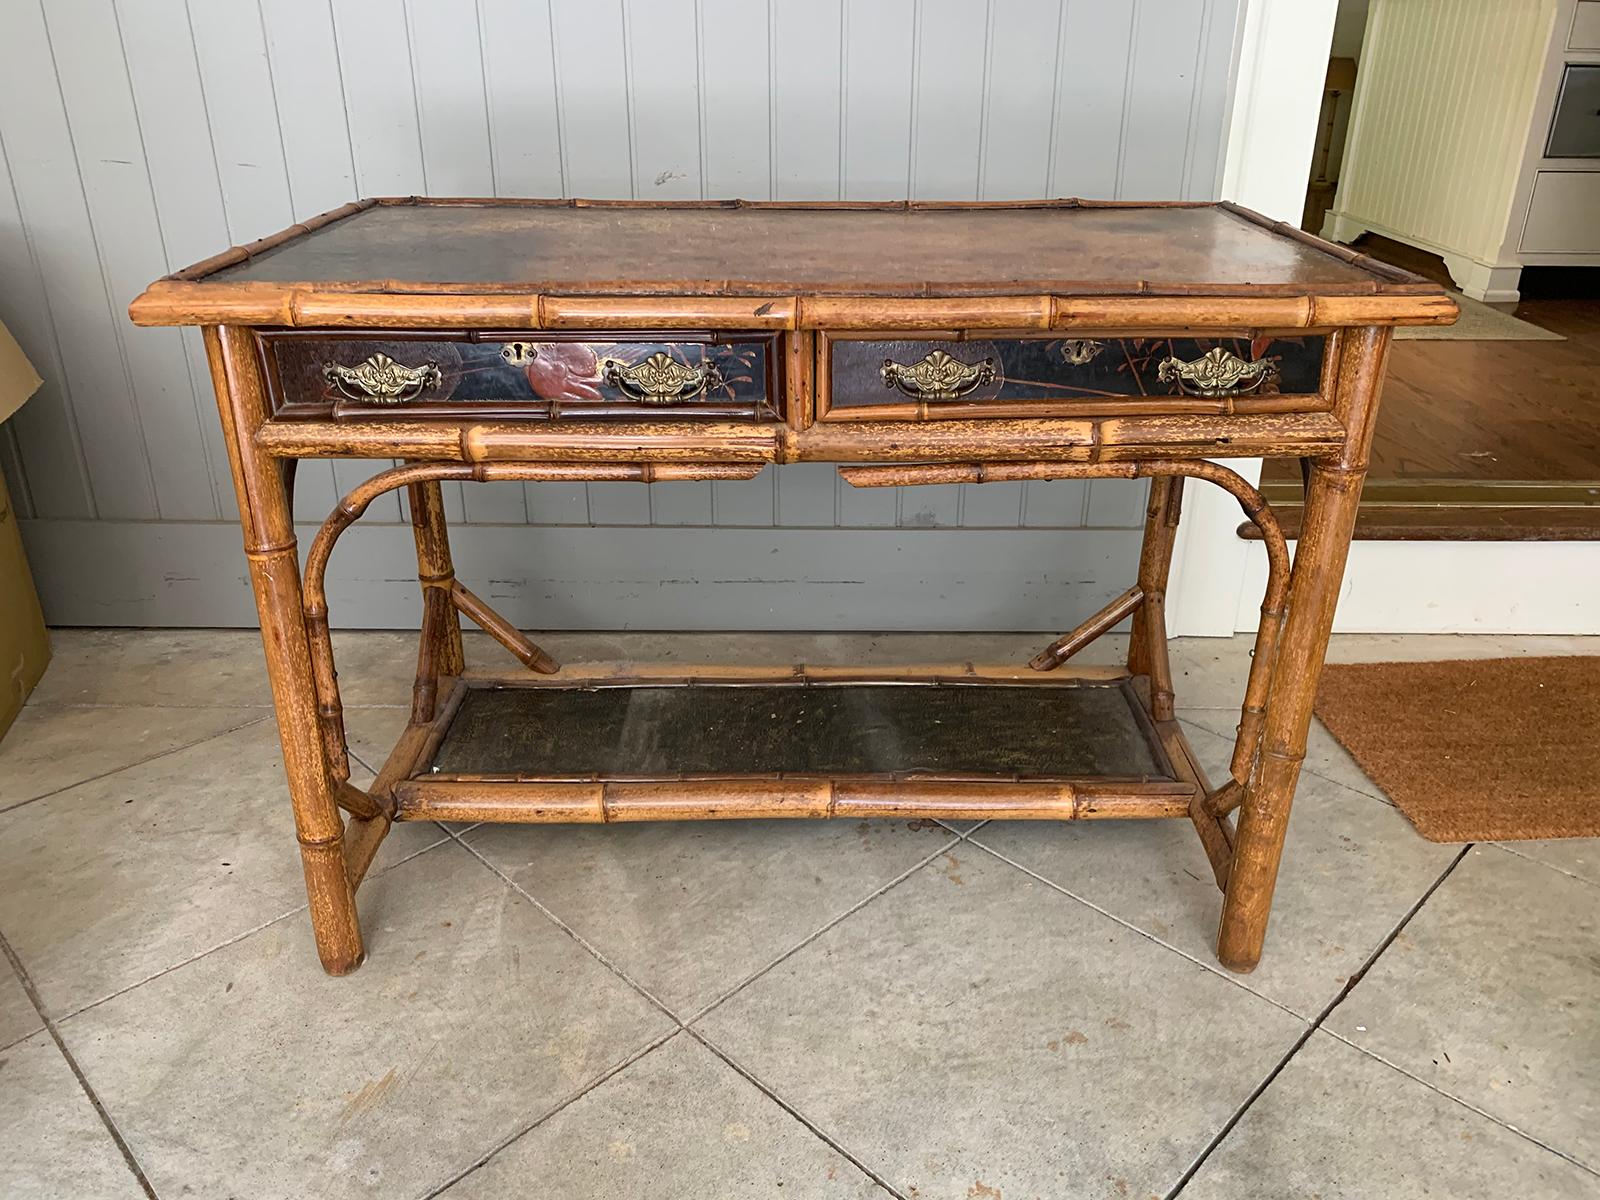 Late 19th-early 20th century bamboo desk with leather top
Measures: 43